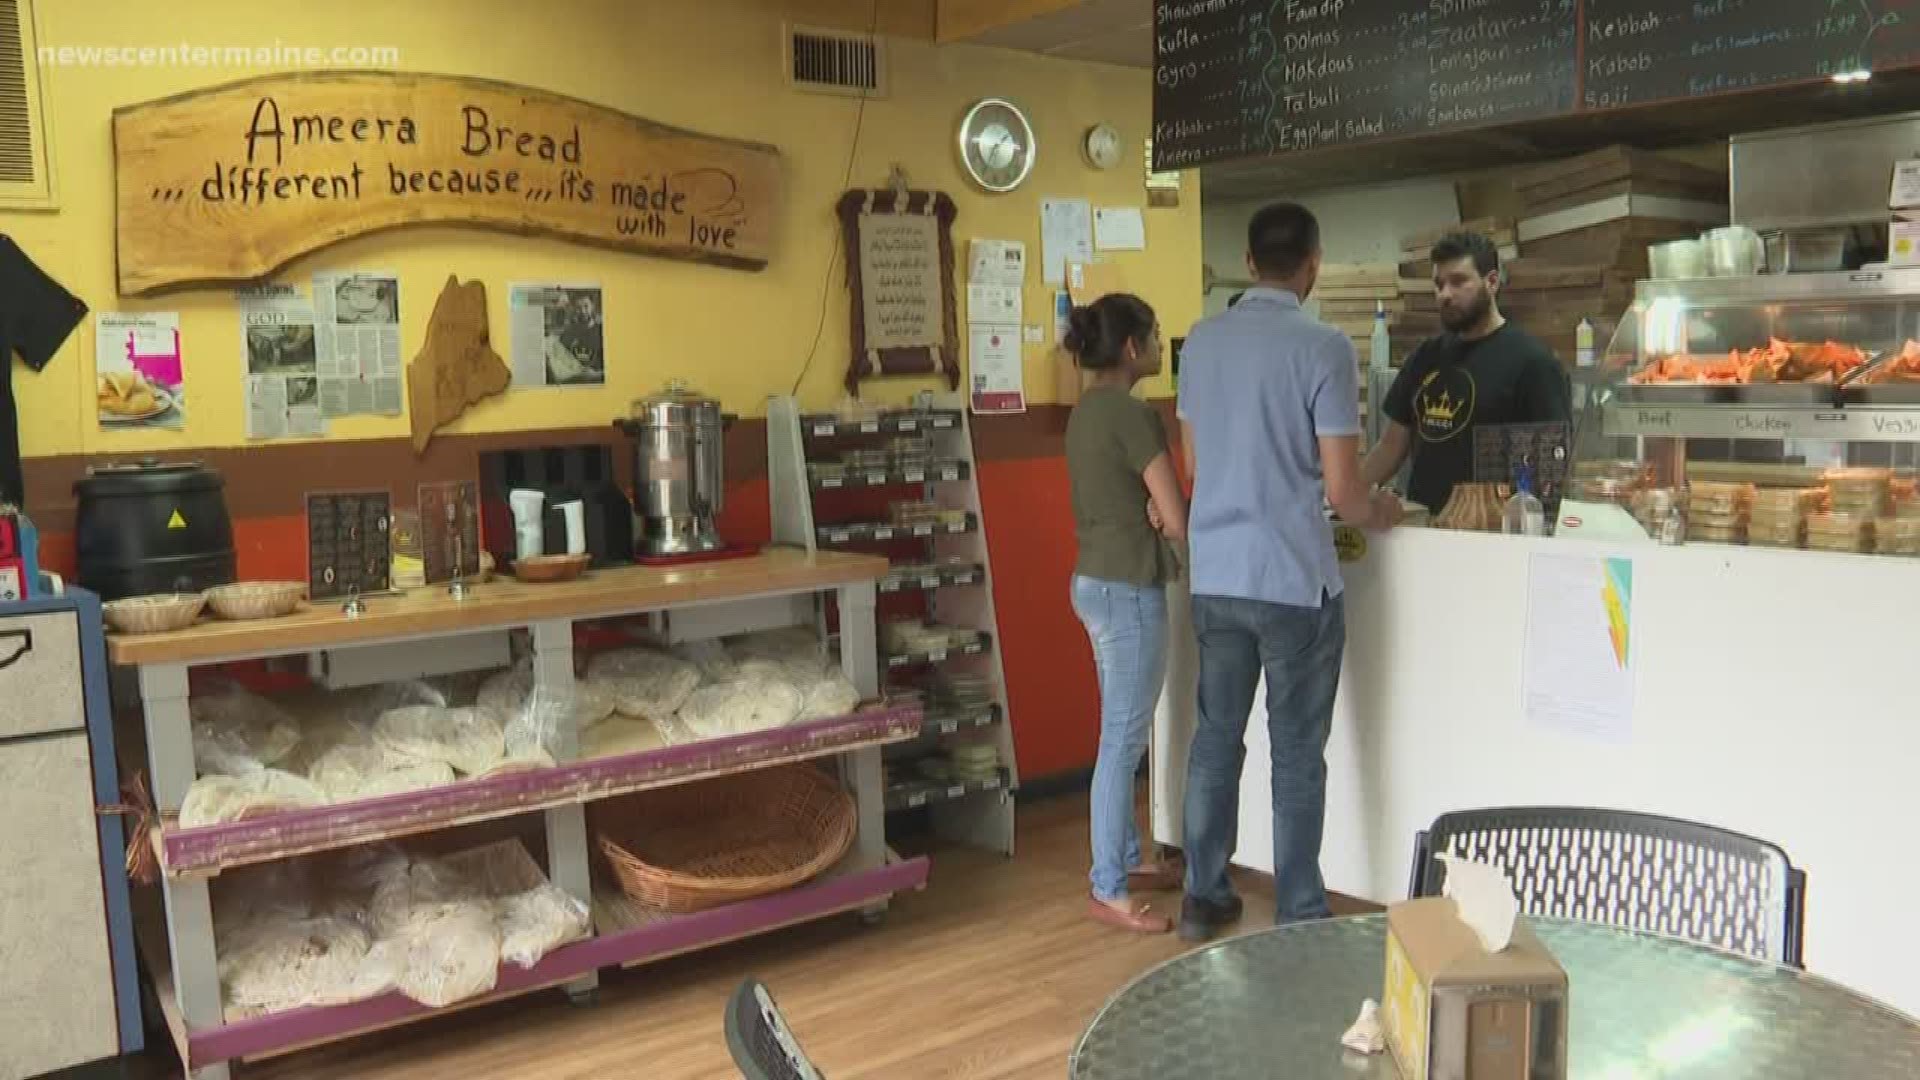 Ahmed Abbas came to the United States from Iraq in 2012. The refugee now owns Ameera Bread in Portland and was recognized with a 2019 Small Business Award.